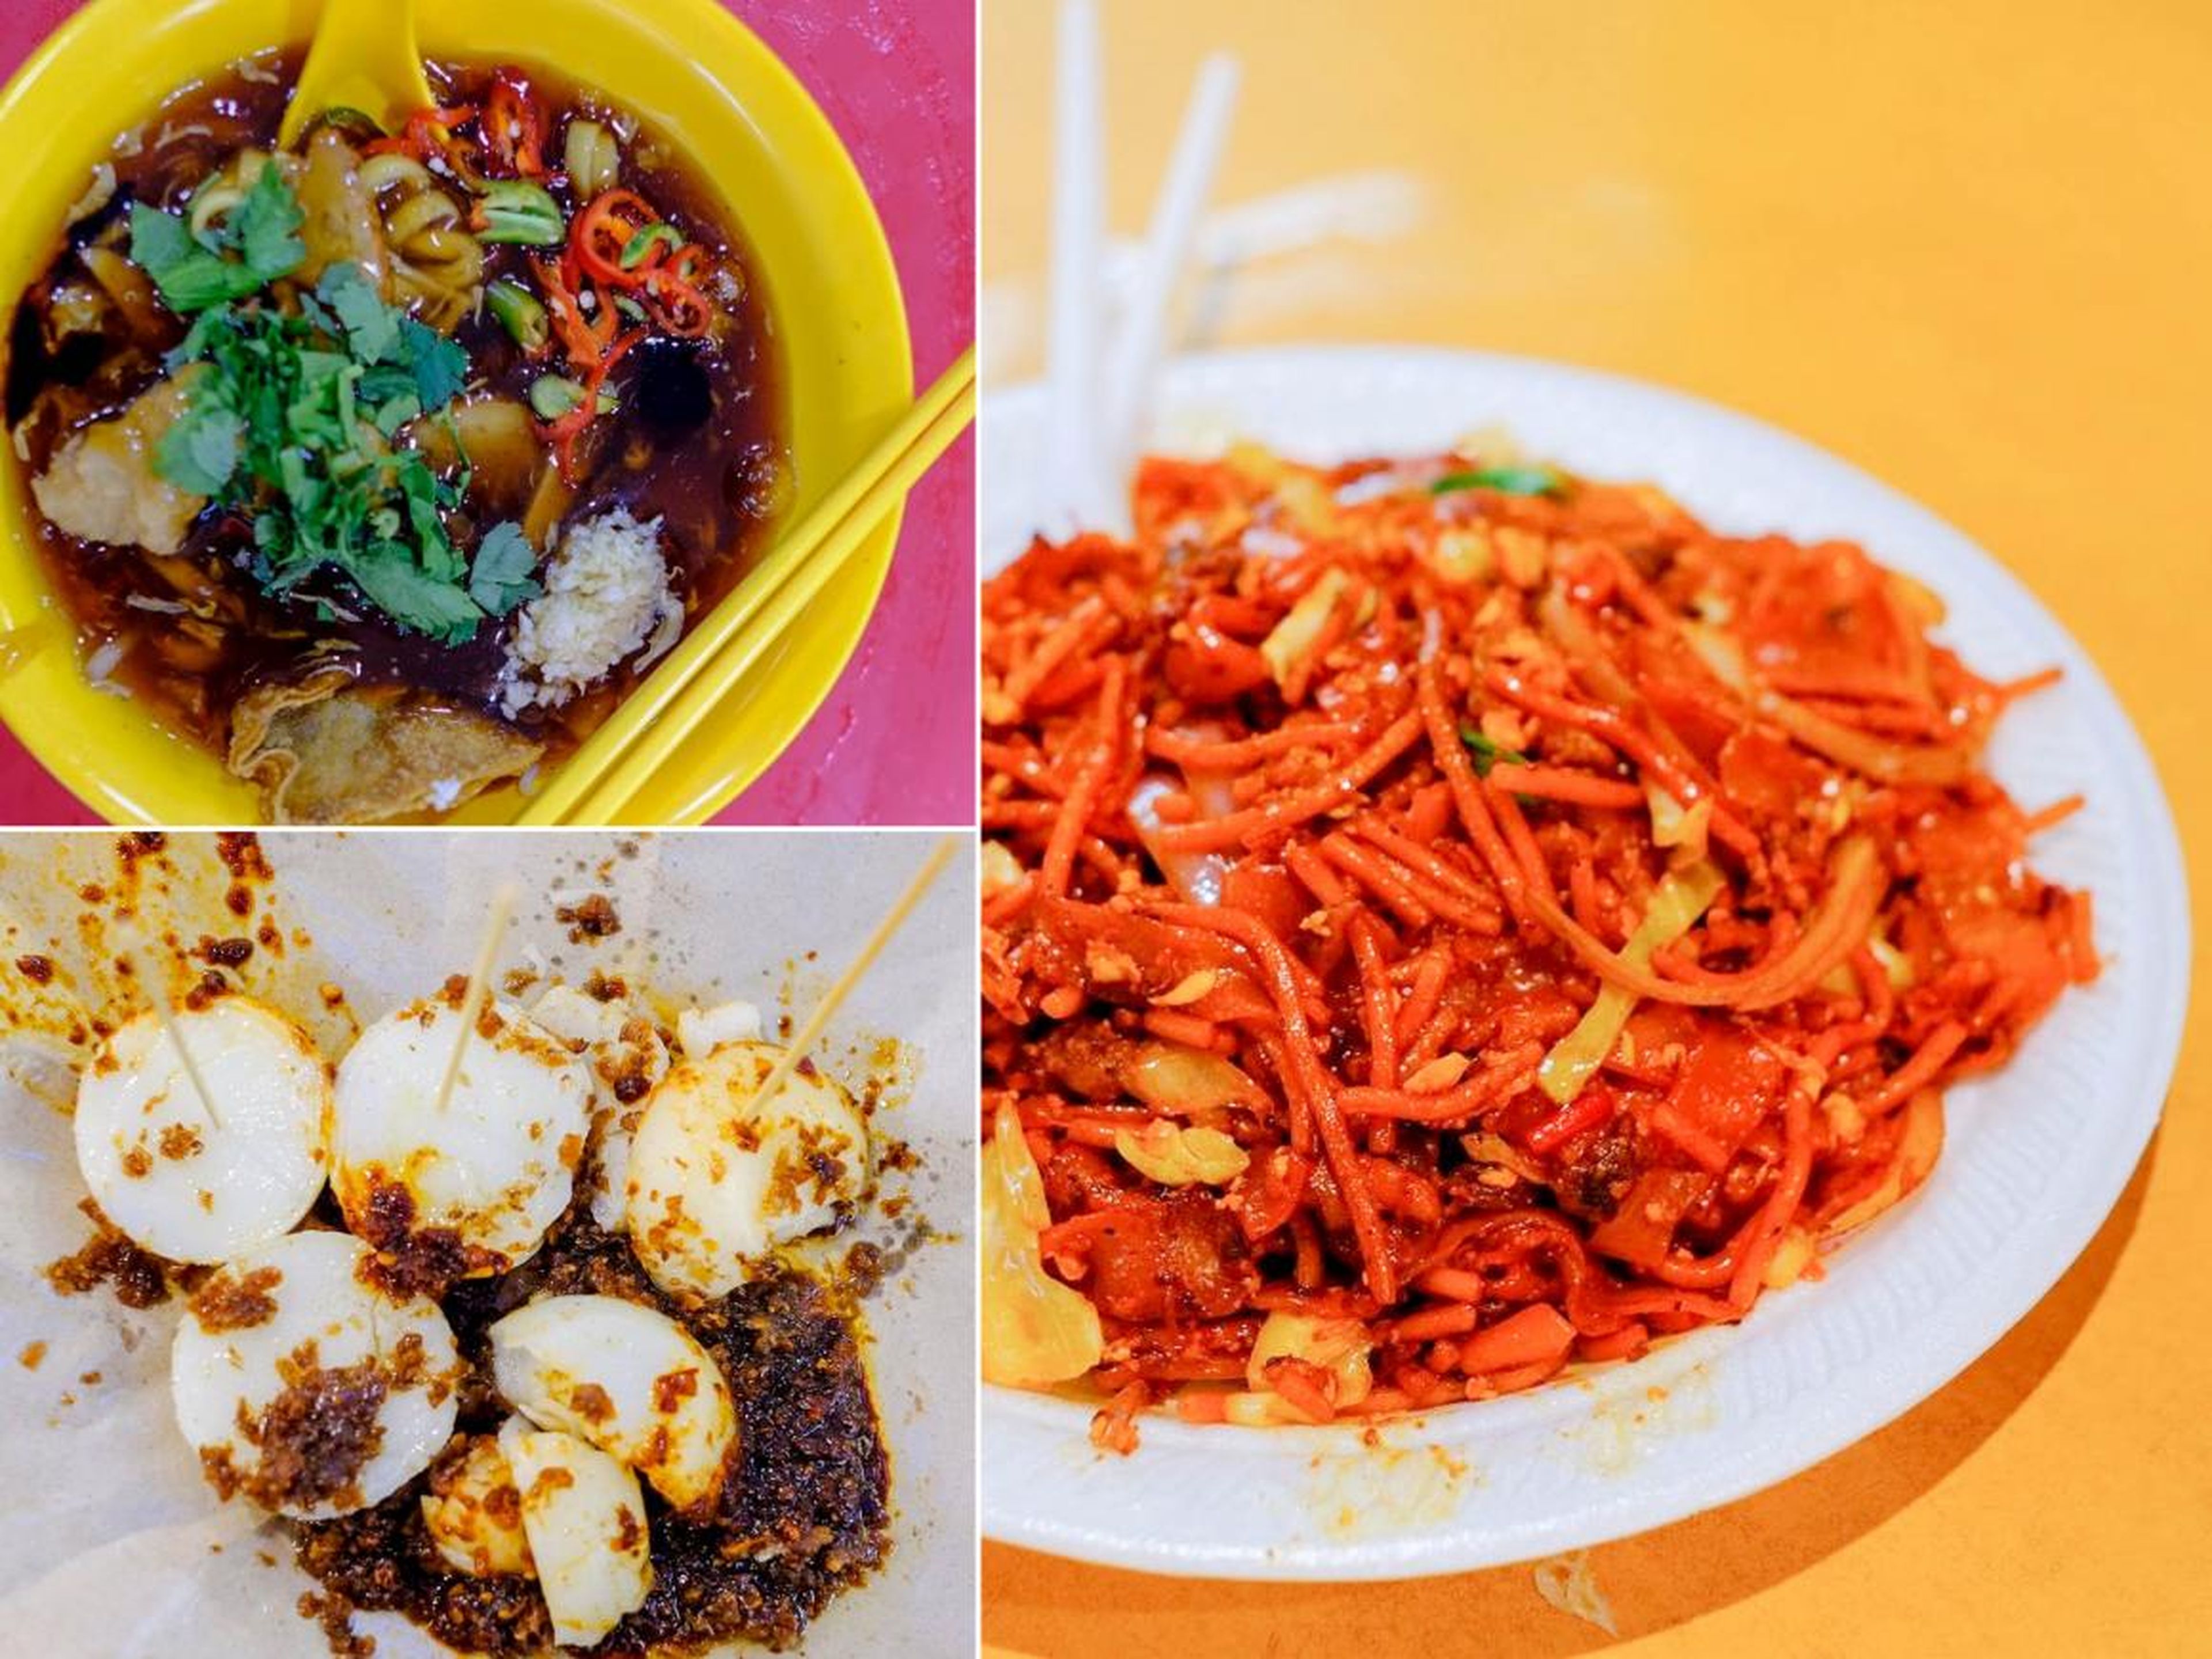 Three dishes I had on my food tour, from left: lor mee, a Chinese noodle soup of flat noodles and thick gravy; Indian mutton noodles; and chwee kueh, steamed rice cakes with hot preserved radish relish.